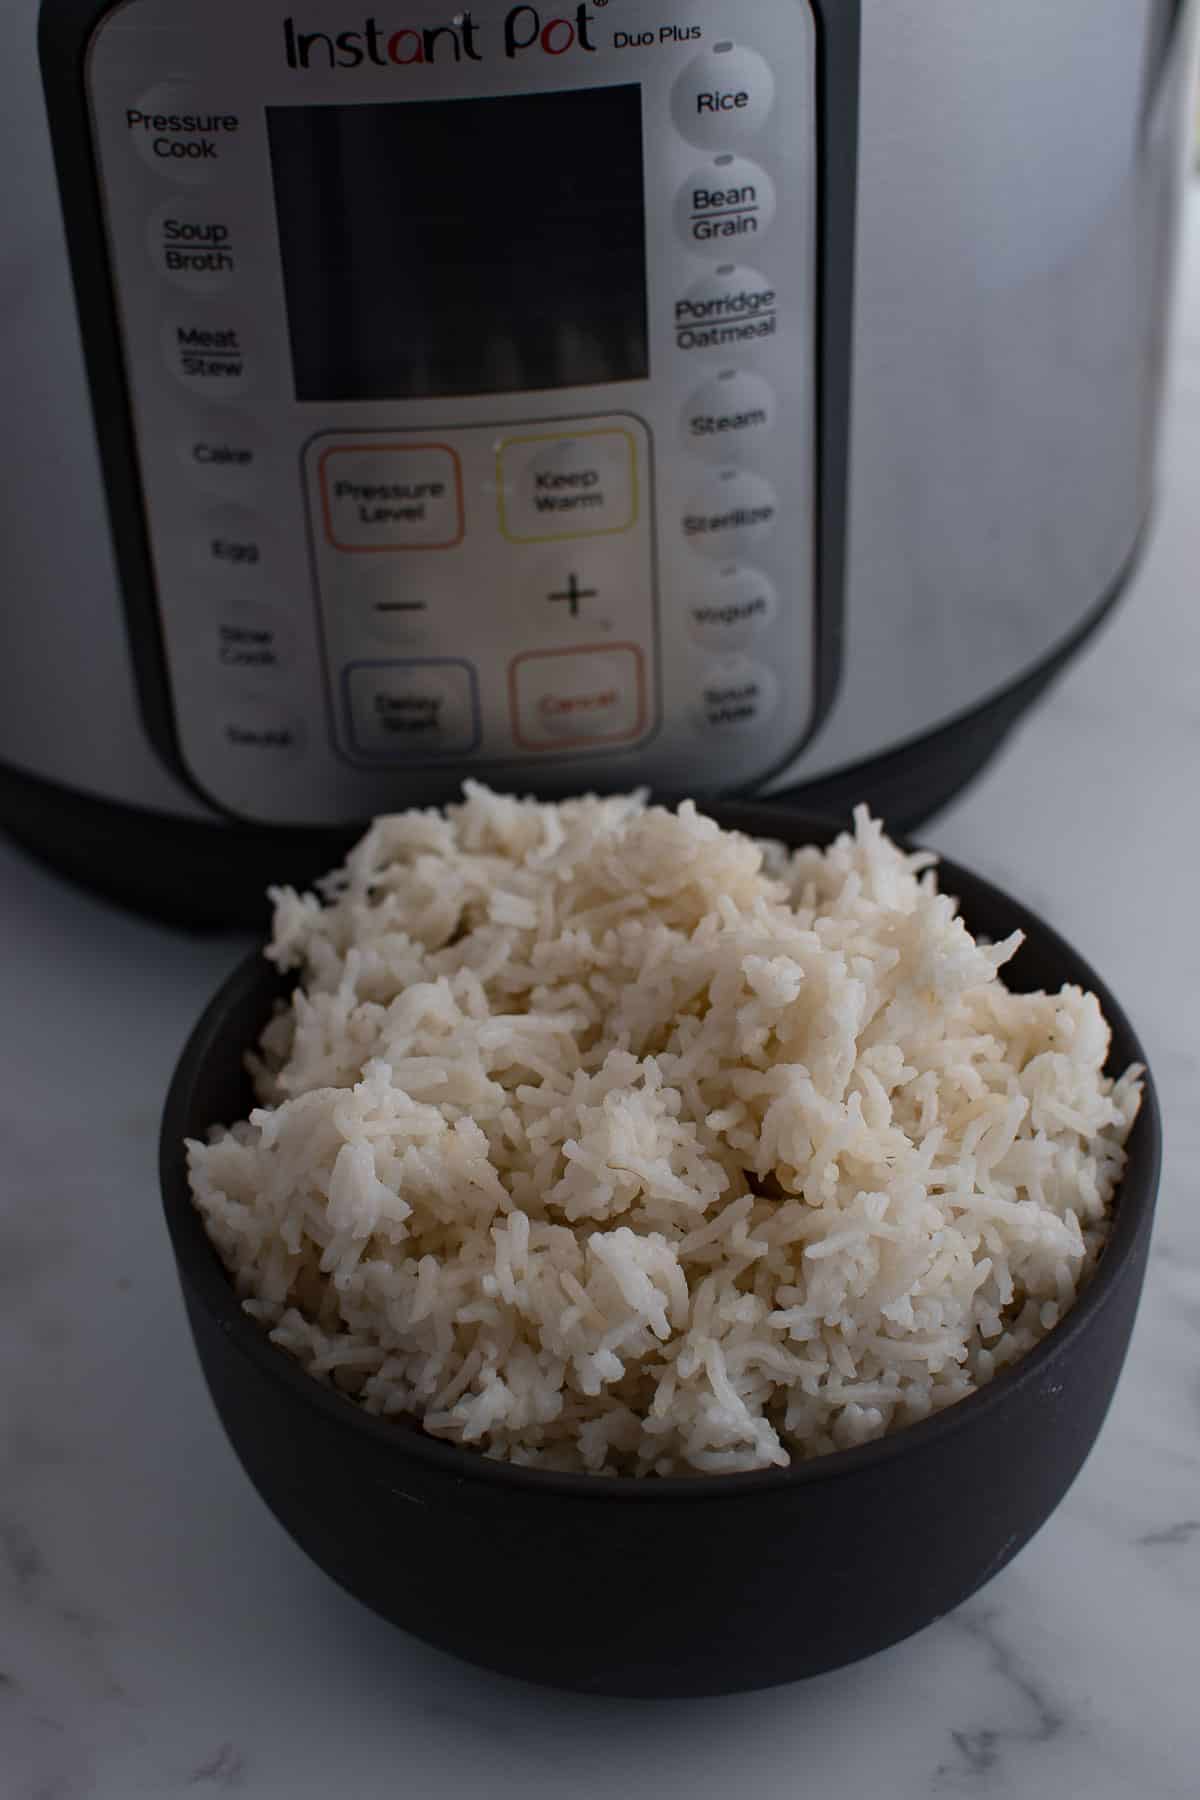 A bowl of rice in front of an instant pot.